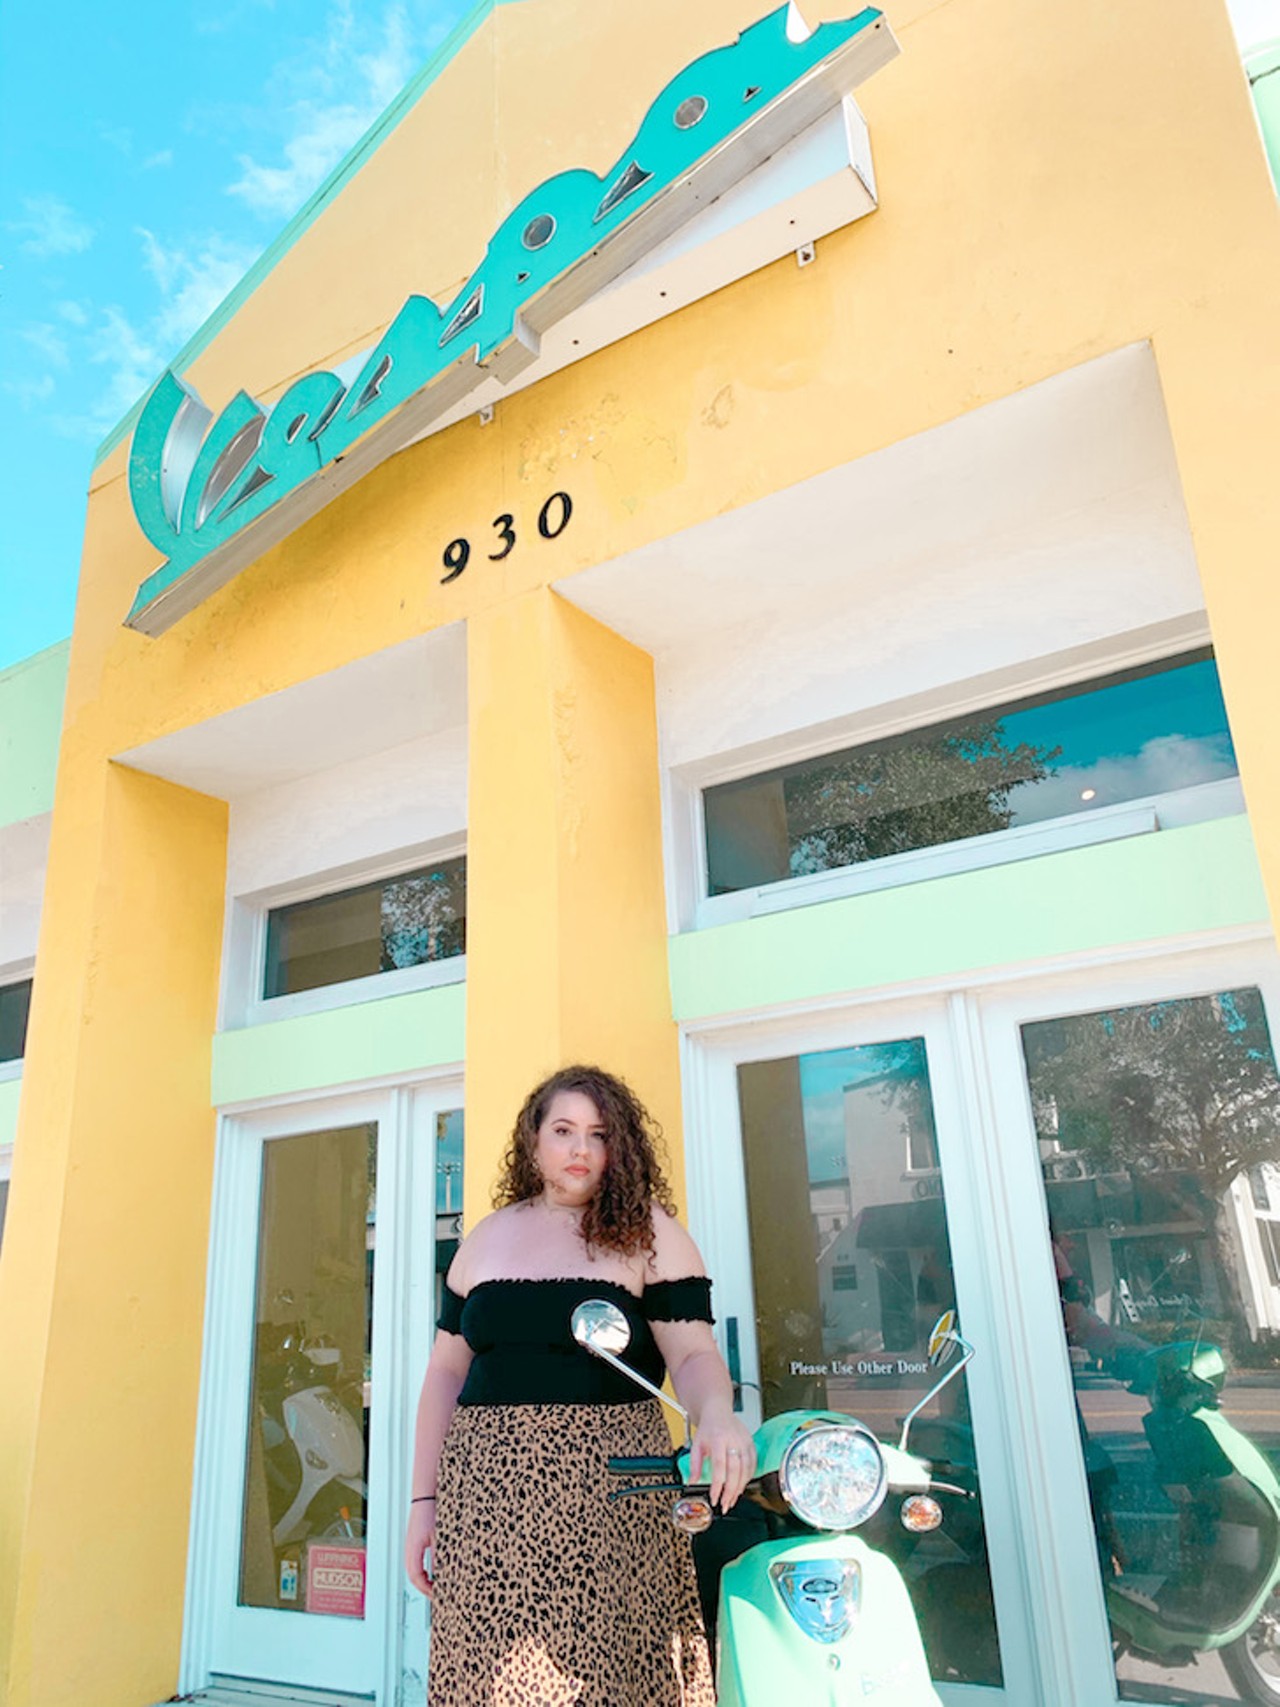 Vespa of Orlando 
930 N. Orange Ave., Winter Park
Although it&#146;s just a Vespa retailer, you can&#146;t help but stop at this sunshine-yellow storefront. Plus, who doesn&#146;t love a good Vespa scooter as a prop? Just be careful with the scooters &#151; you might need to ask permission to pose with one!
Photo via Samantha Olson/Instagram